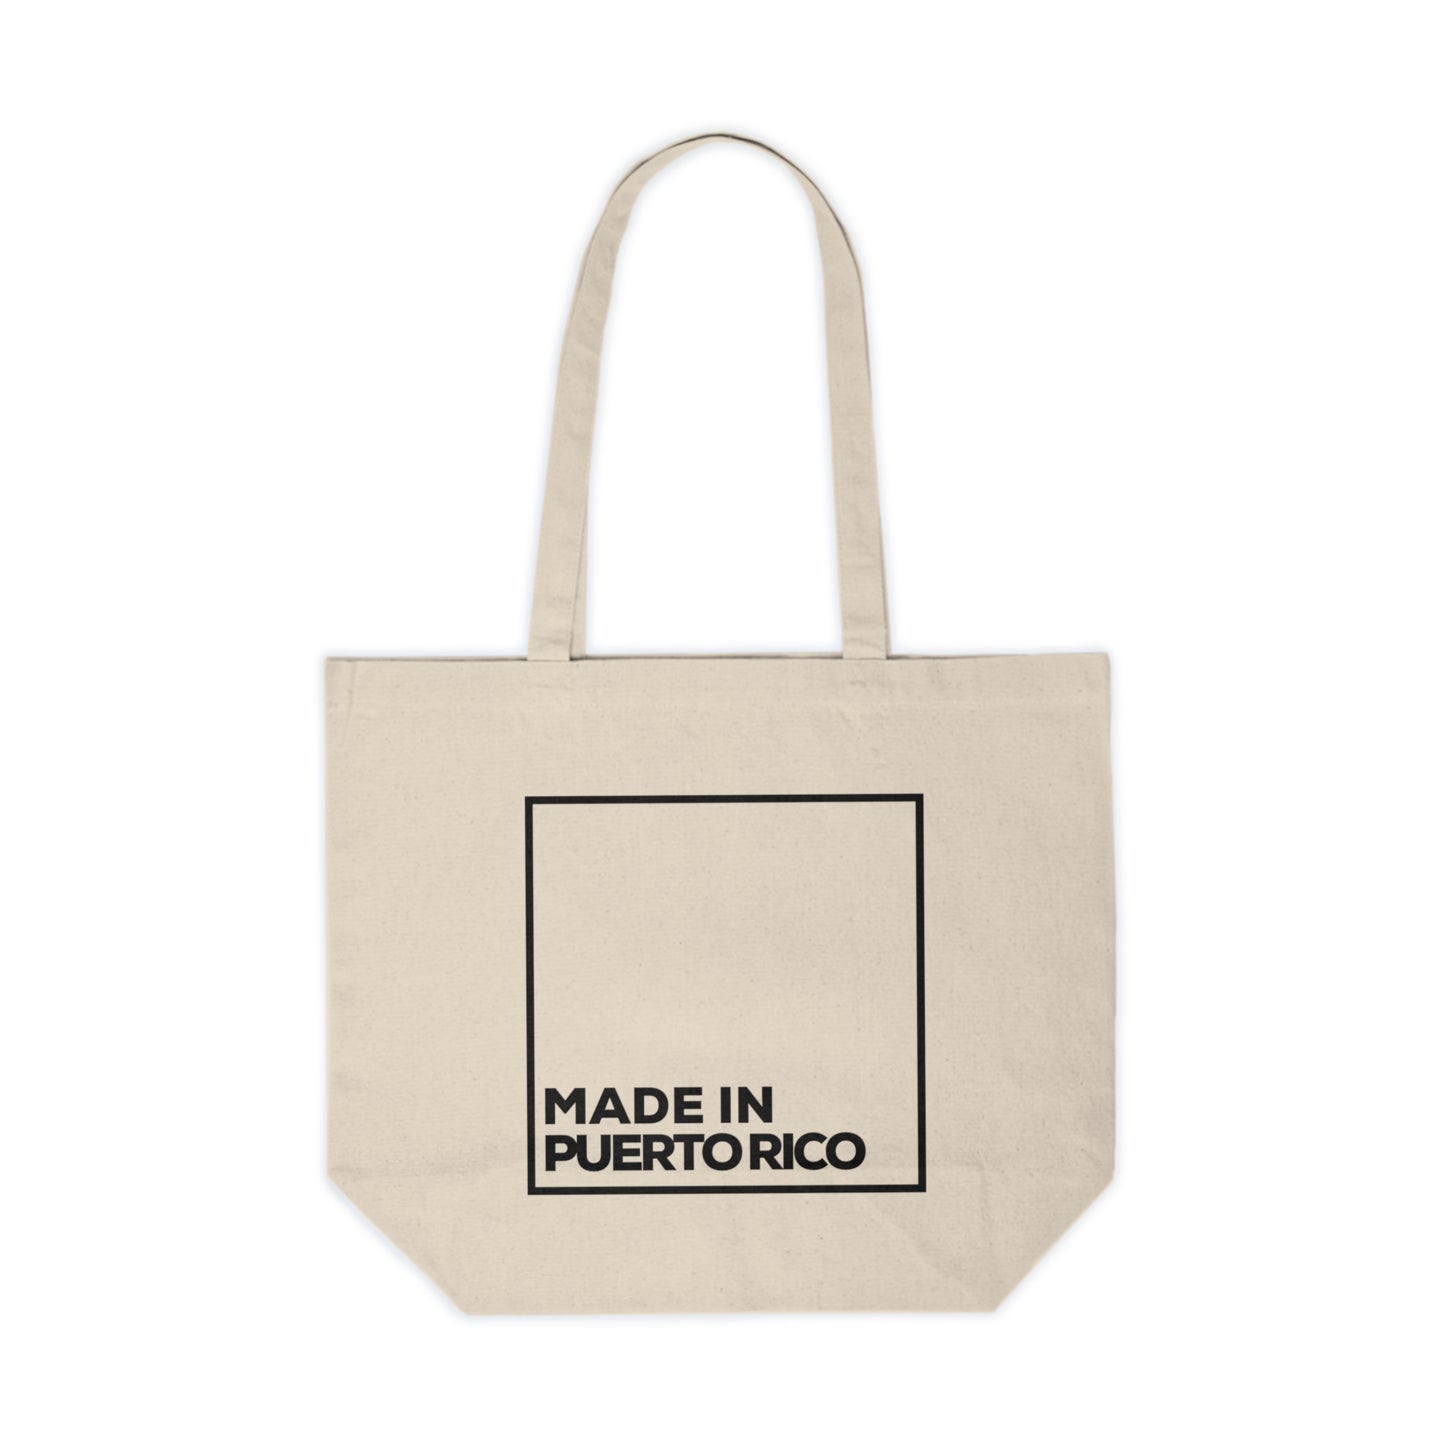 MADE IN PUERTO RICO TOTE BAG